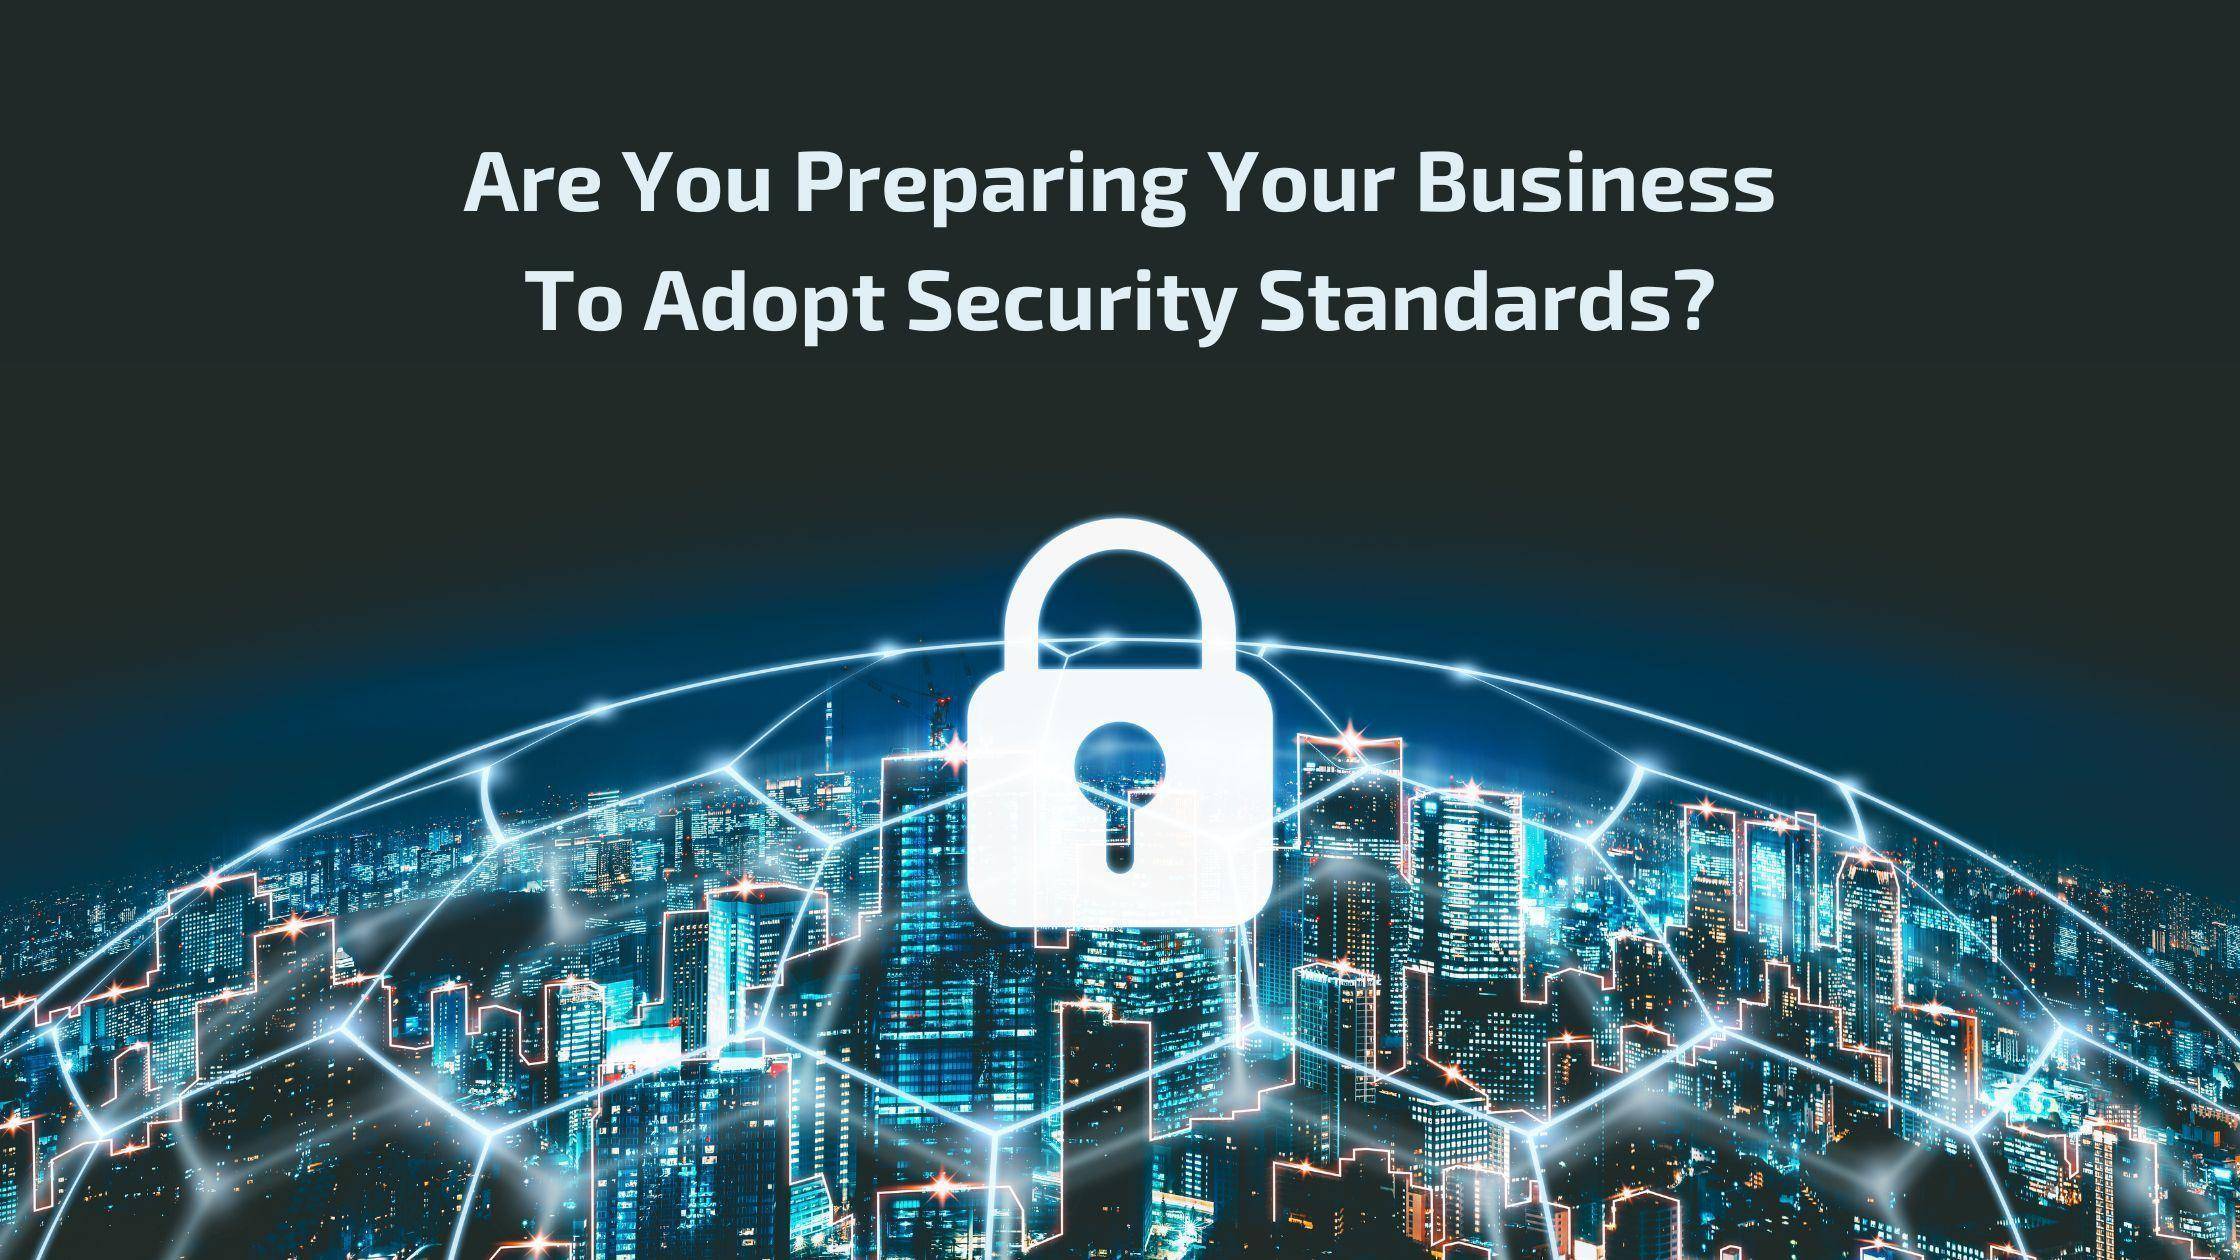 Are you preparing your business to adopt security standards?